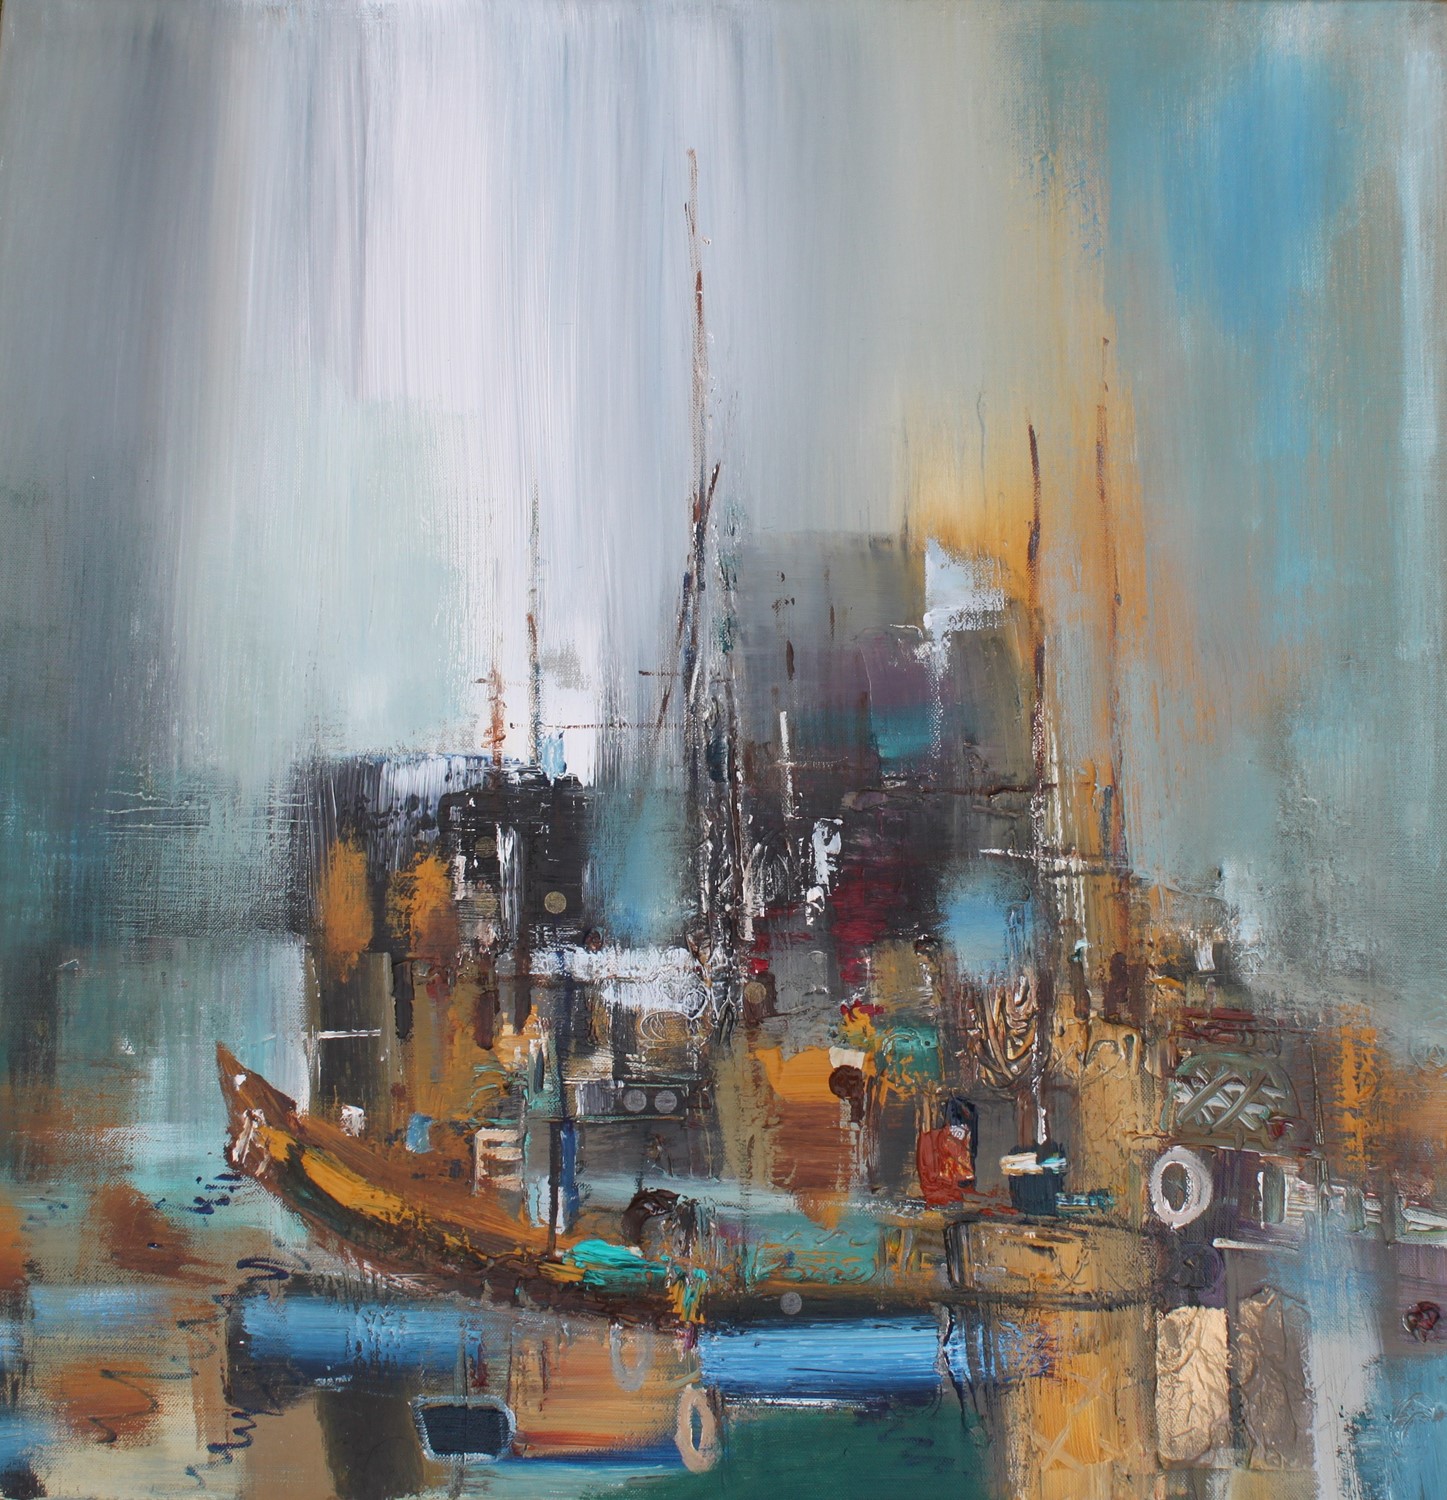 'At the Harbour' by artist Rosanne Barr